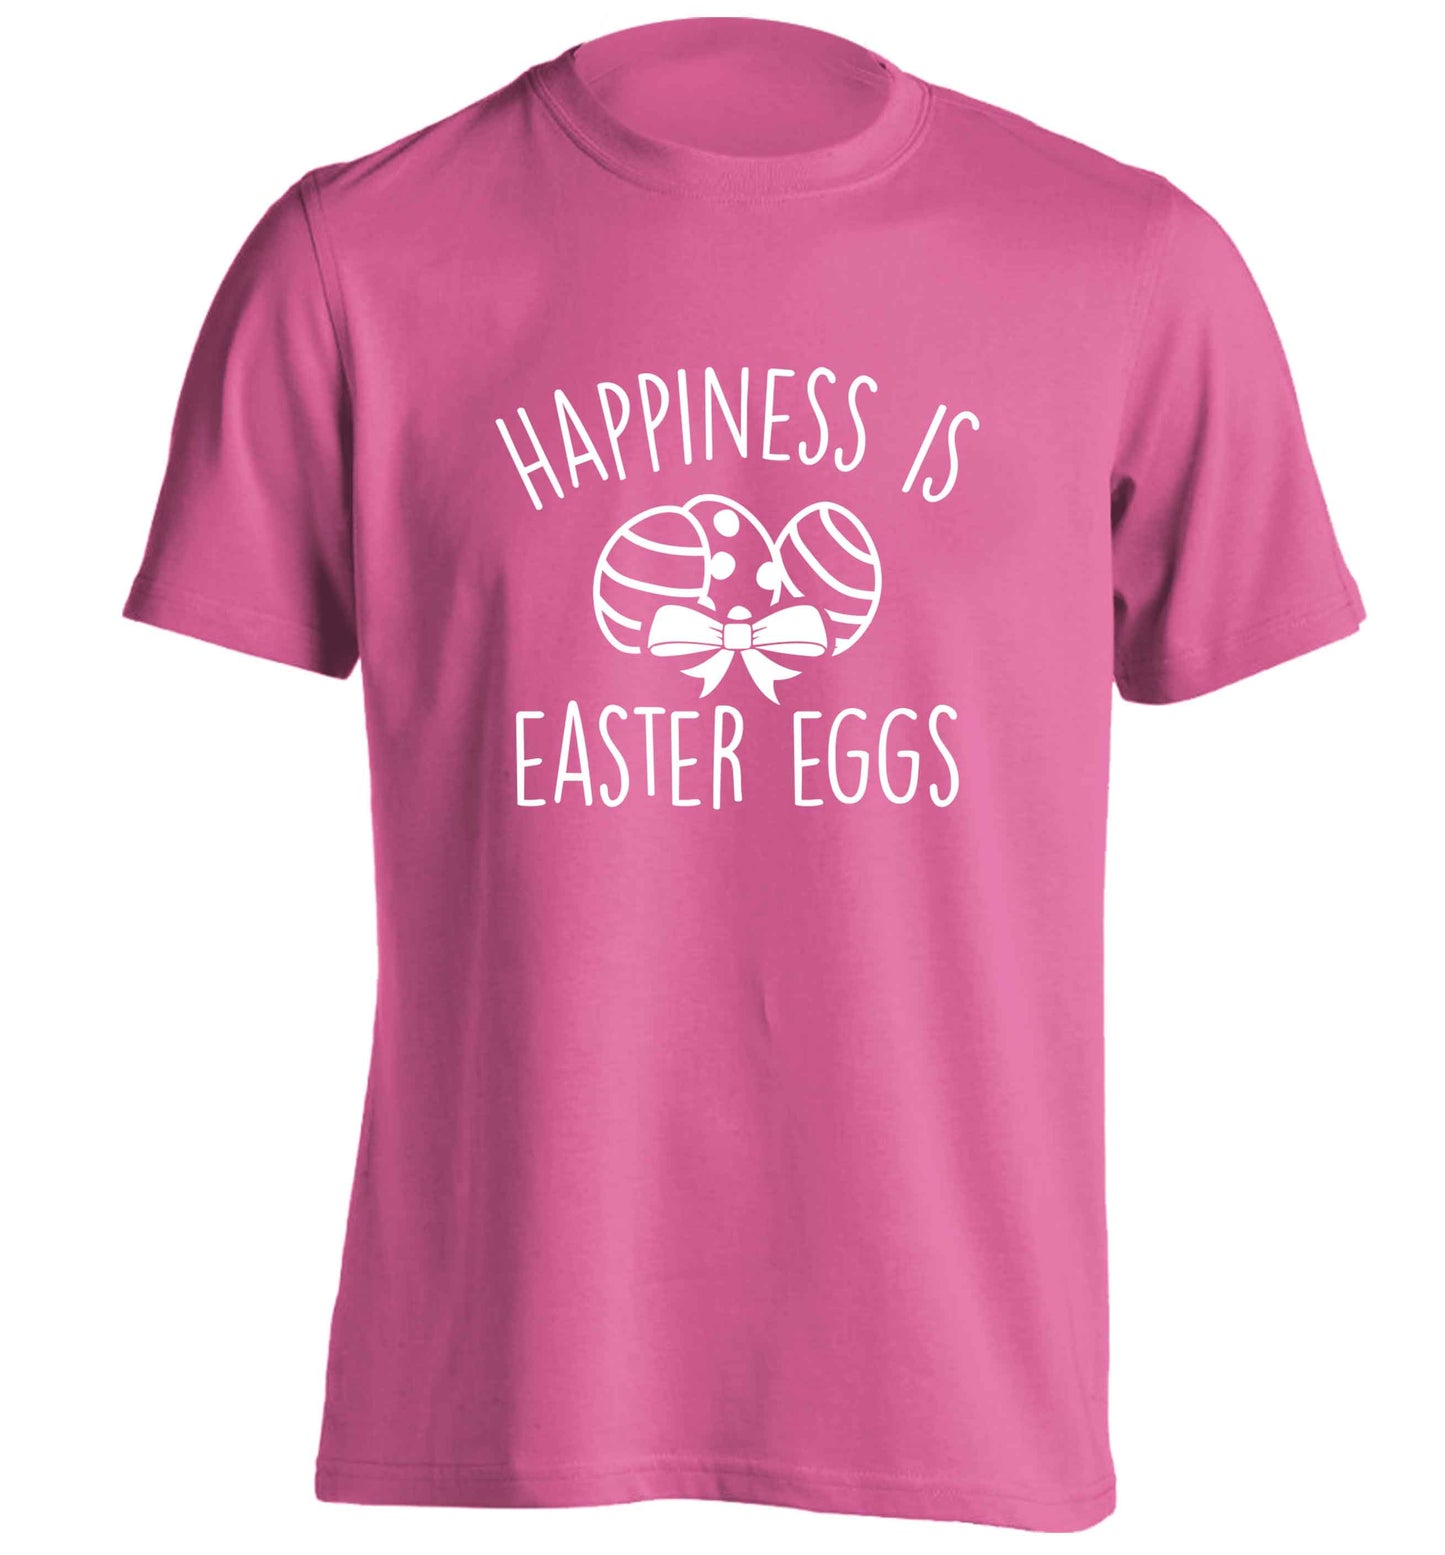 Happiness is Easter eggs adults unisex pink Tshirt 2XL